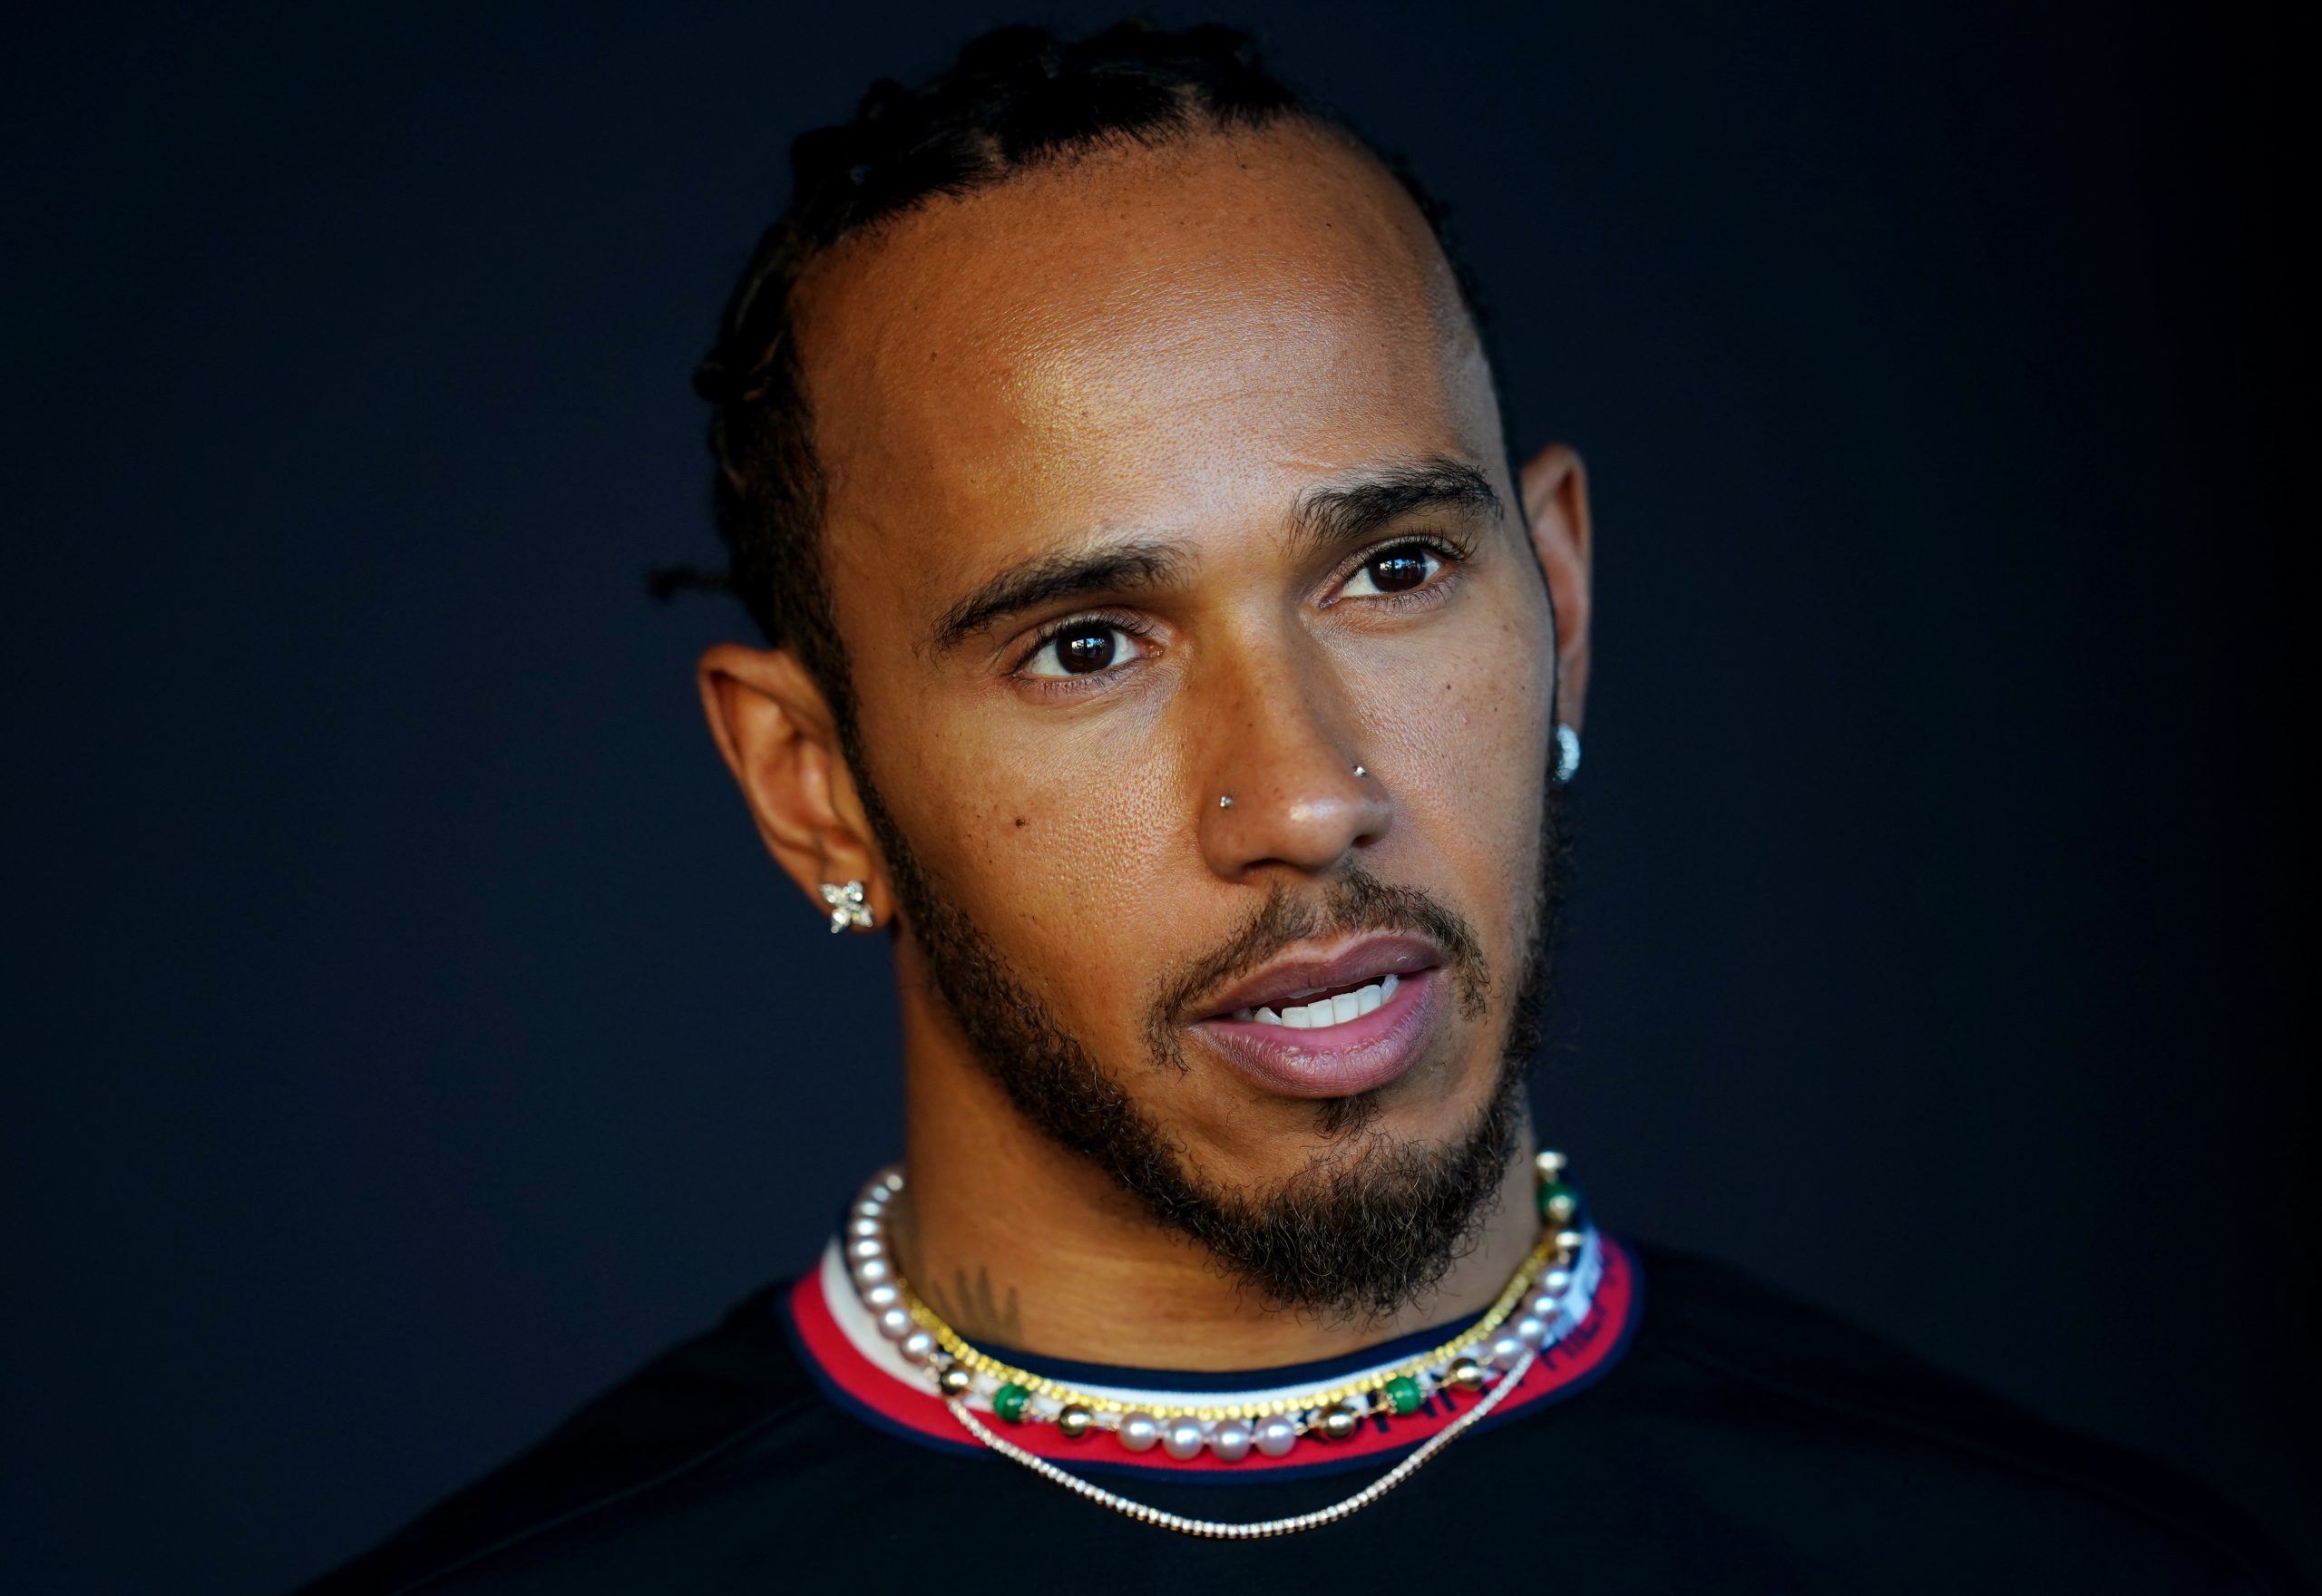 Lewis Hamilton calls for rule change to ensure a ‘real race’